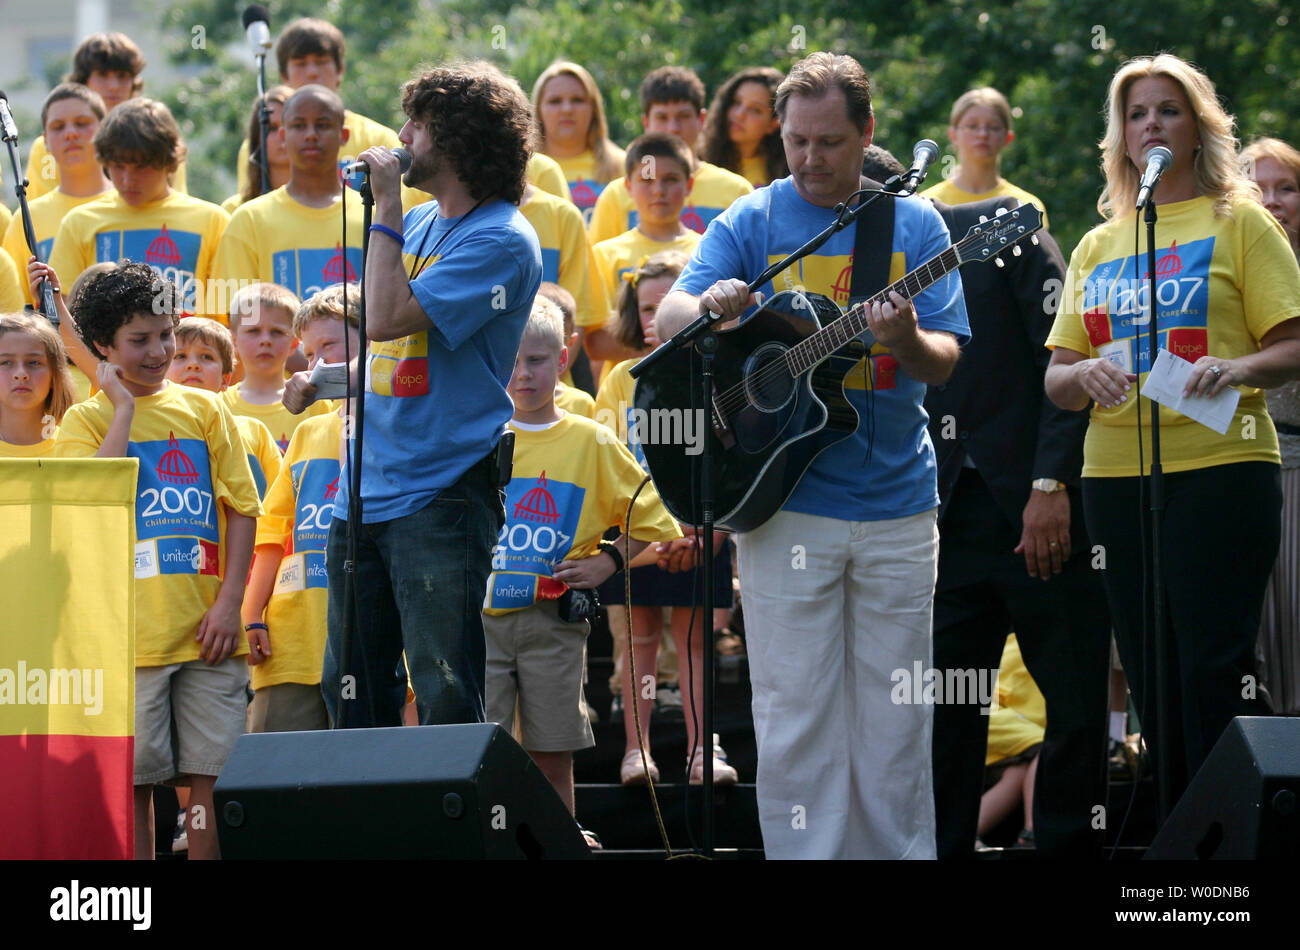 2006 American Idol Finalist Elliott Yamin (L), country music stars Steve Wariner (C) and Trisha Yearwood (R), and 150 children/delegates perform the song, 'Promise to Remember Me' on Capitol Hill in Washington on June 18, 2007. The Juvenile Diabetes Research Foundation held it's 'Children's Congress 2007' in an effort to raise awareness in Congress. (UPI Photo/Dominic Bracco II) Stock Photo